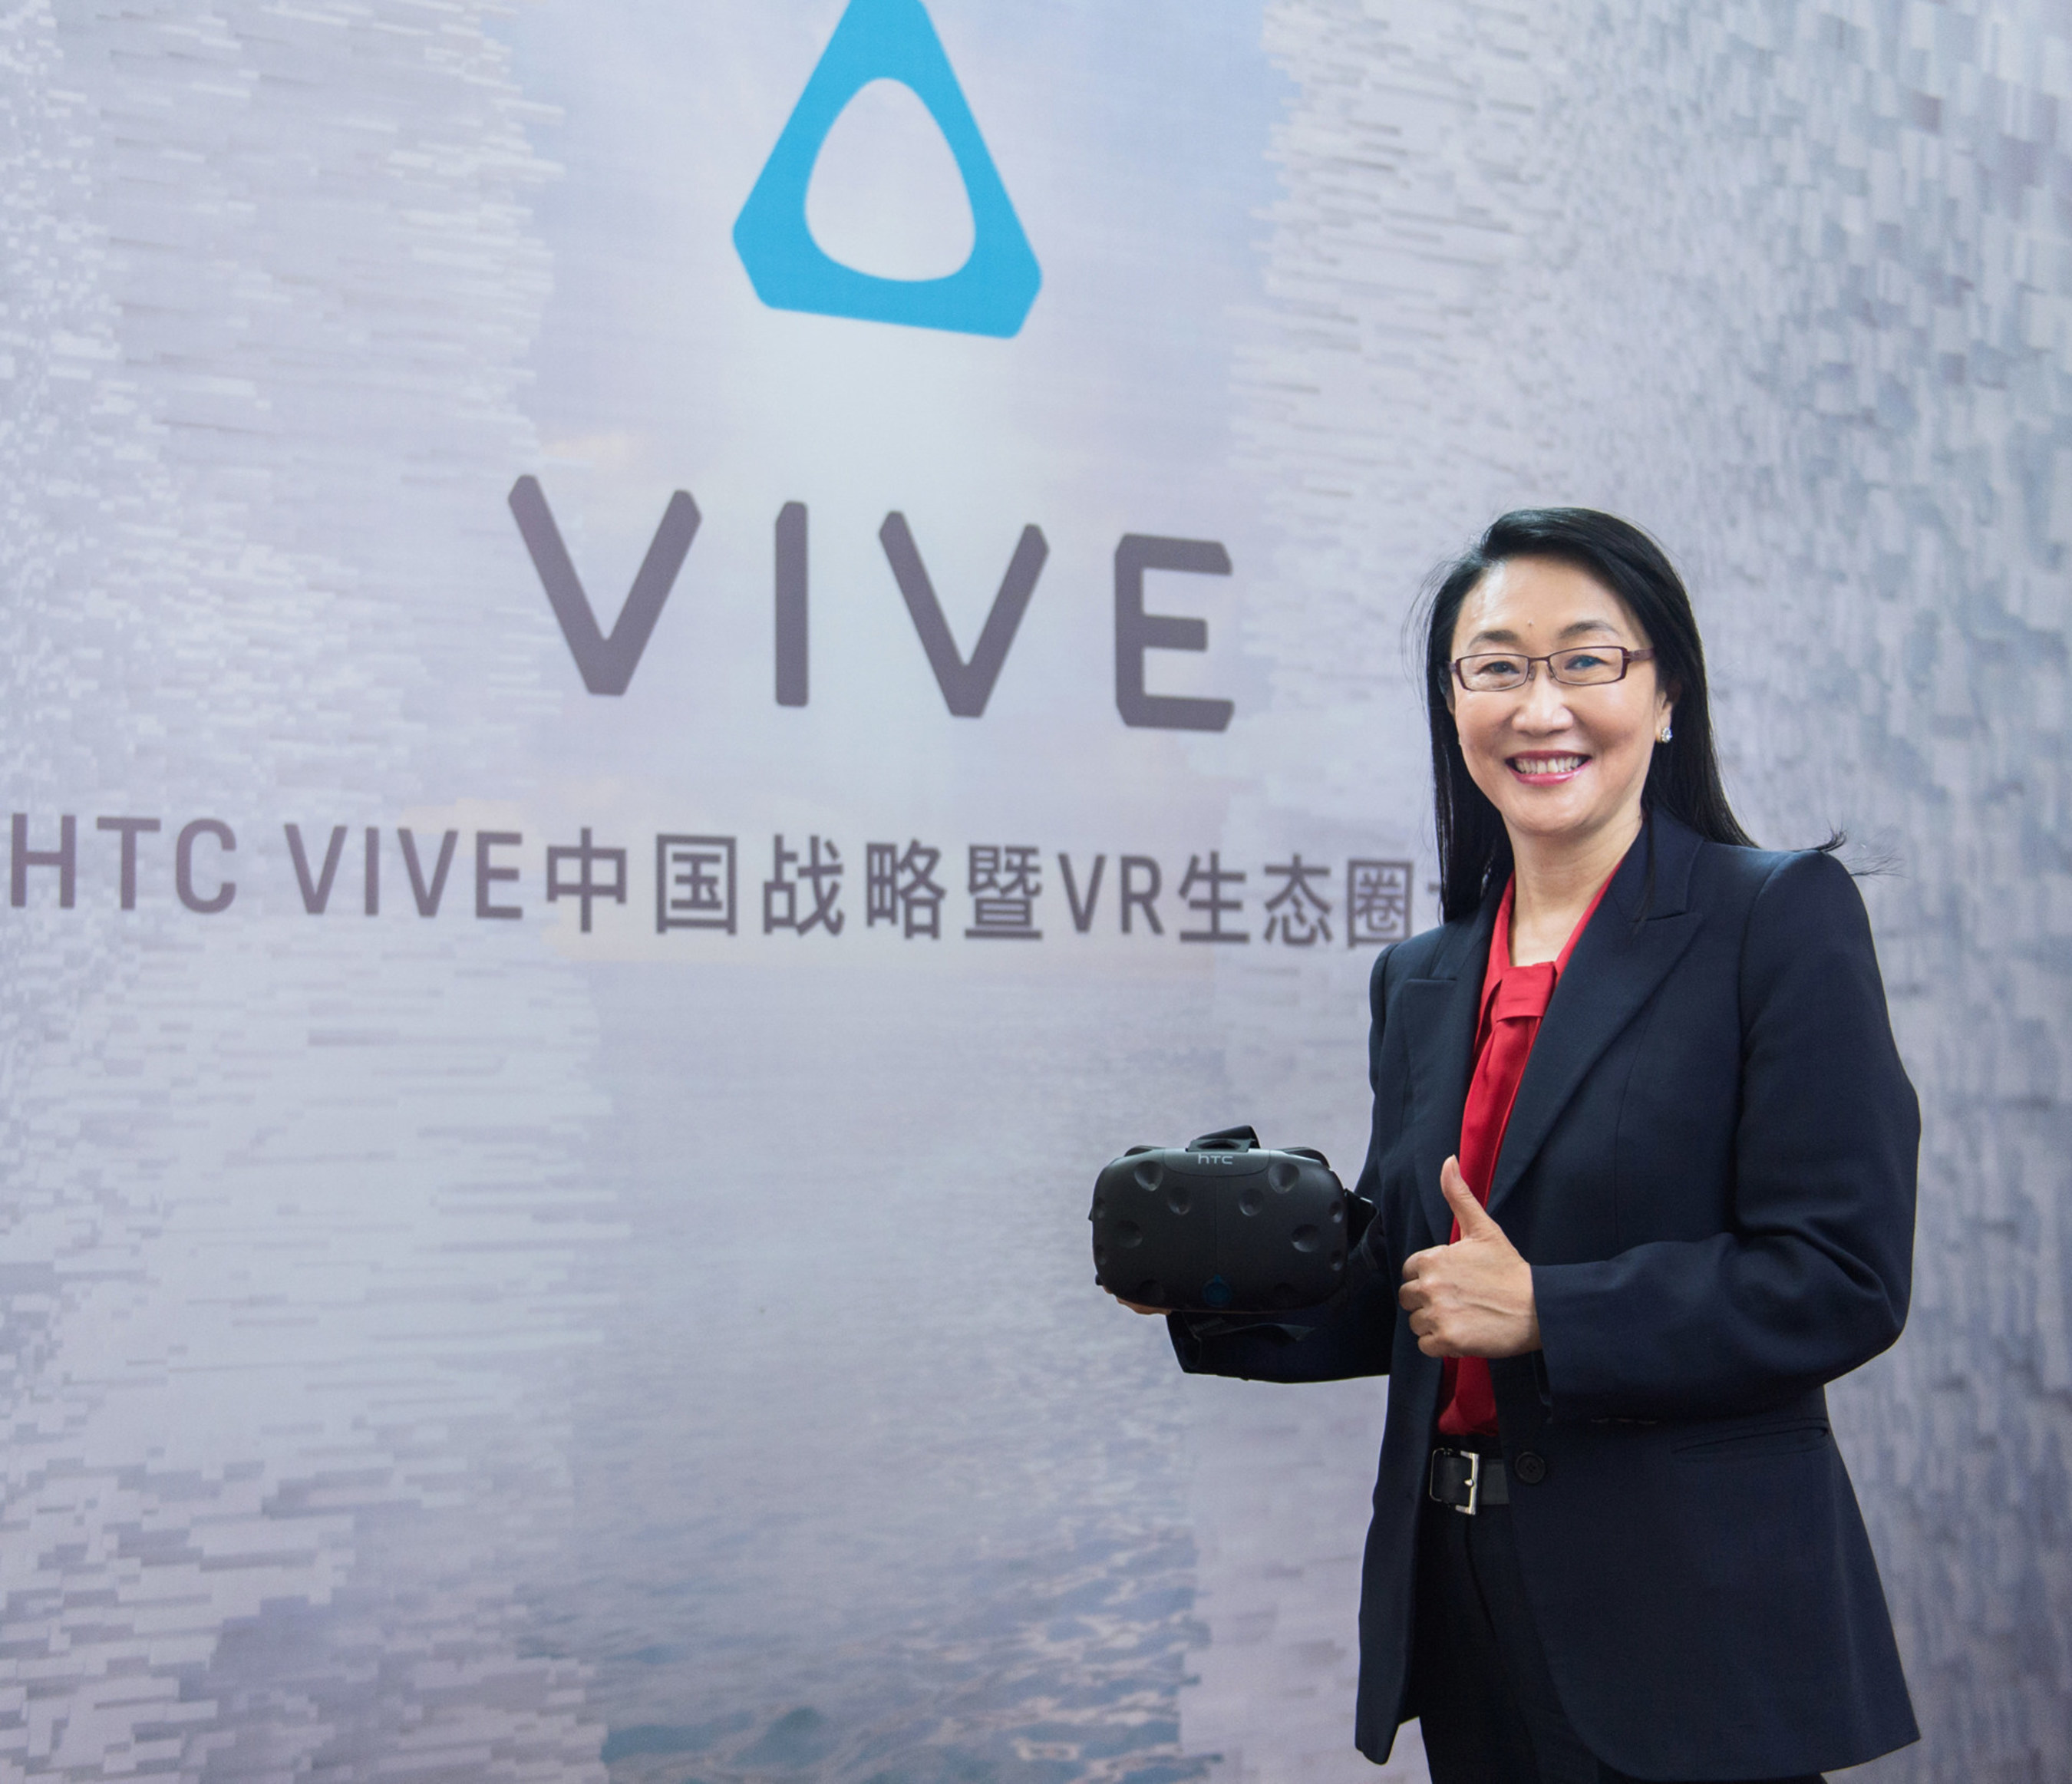 Chairwoman and CEO of HTC, Cher Wang and Vive